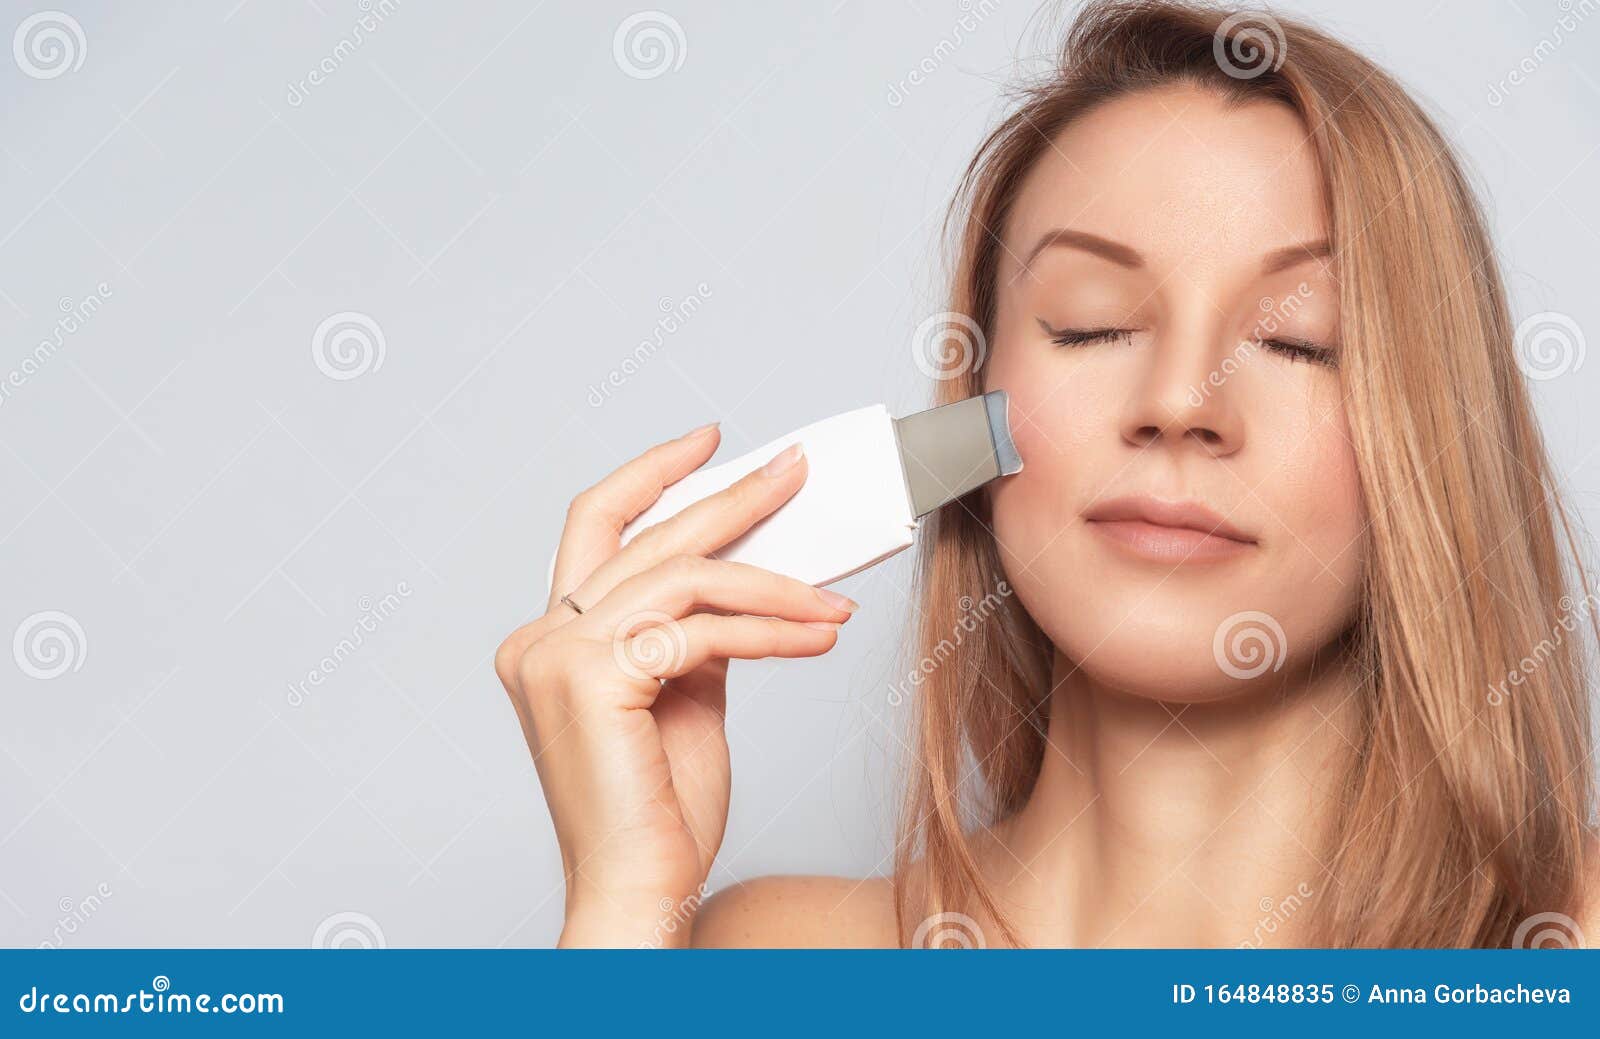 woman with skin care treatment device.